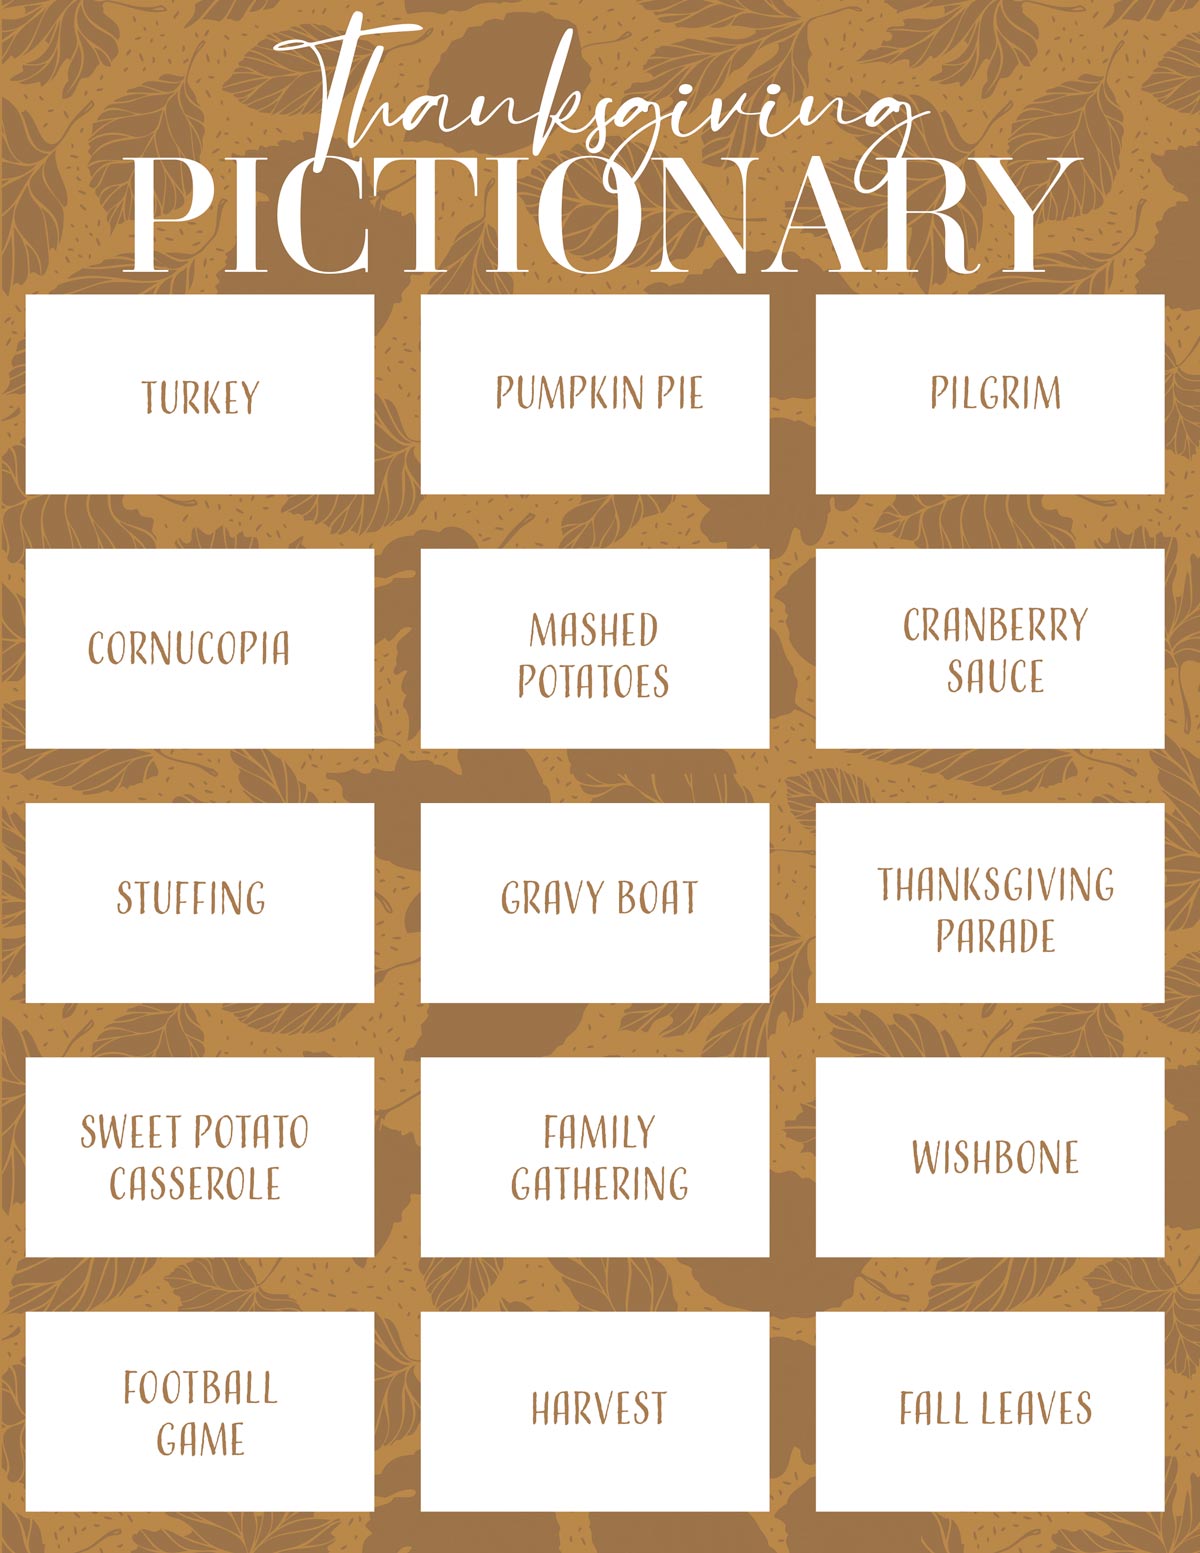 Free printable Thanksgiving pictionary cards to play with the whole family. from Skip to my Lou